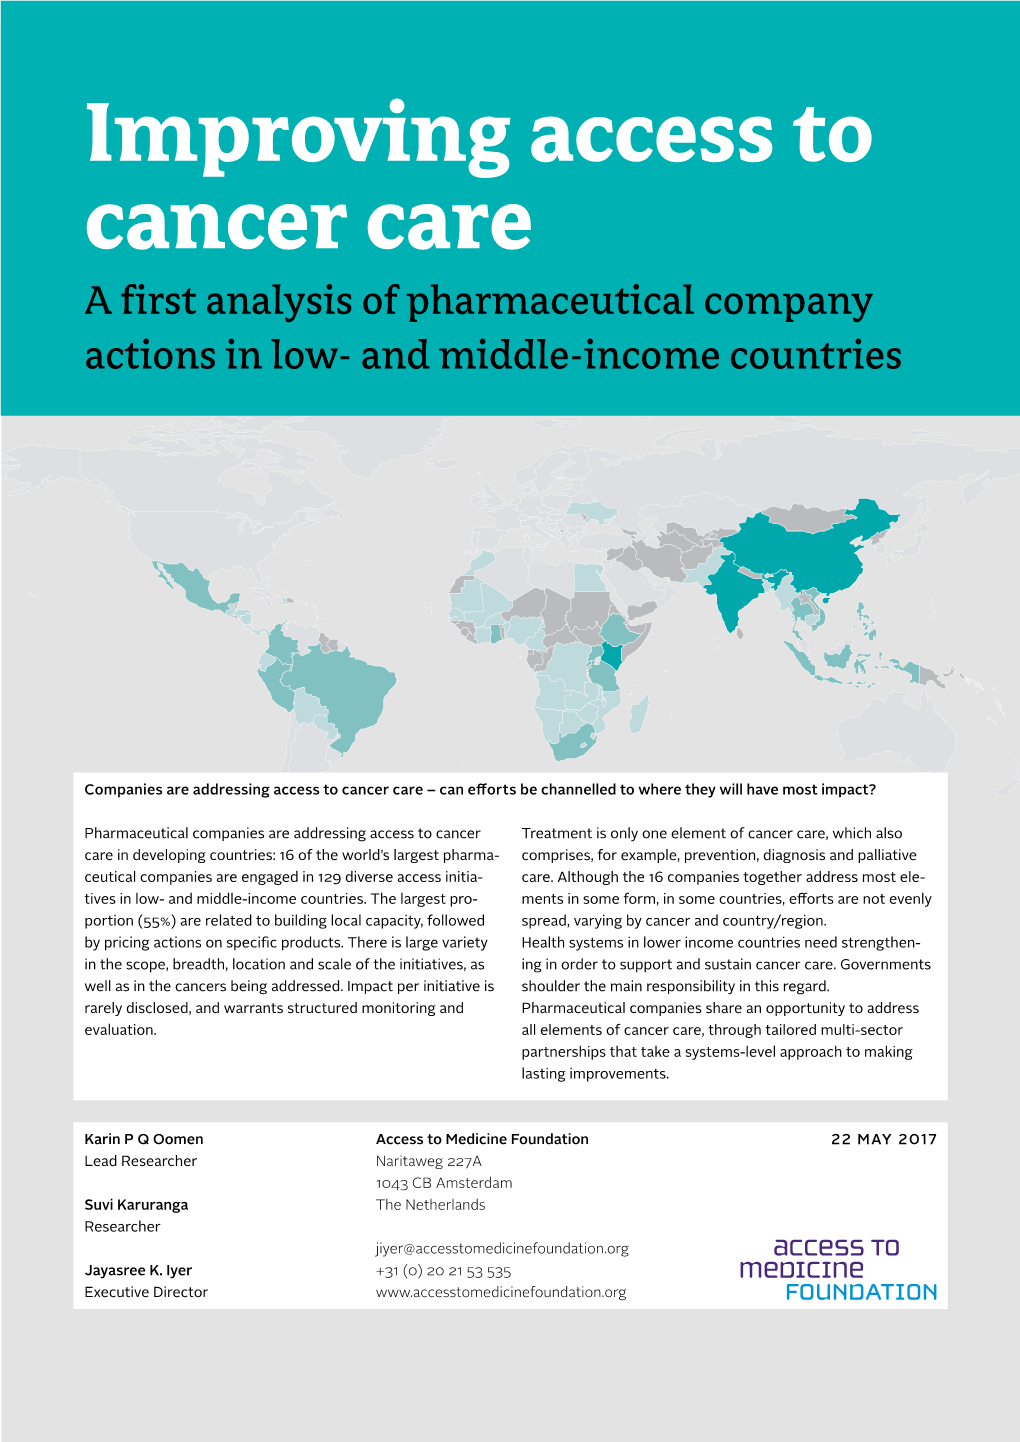 Improving Access to Cancer Care a First Analysis of Pharmaceutical Company Actions in Low- and Middle-Income Countries